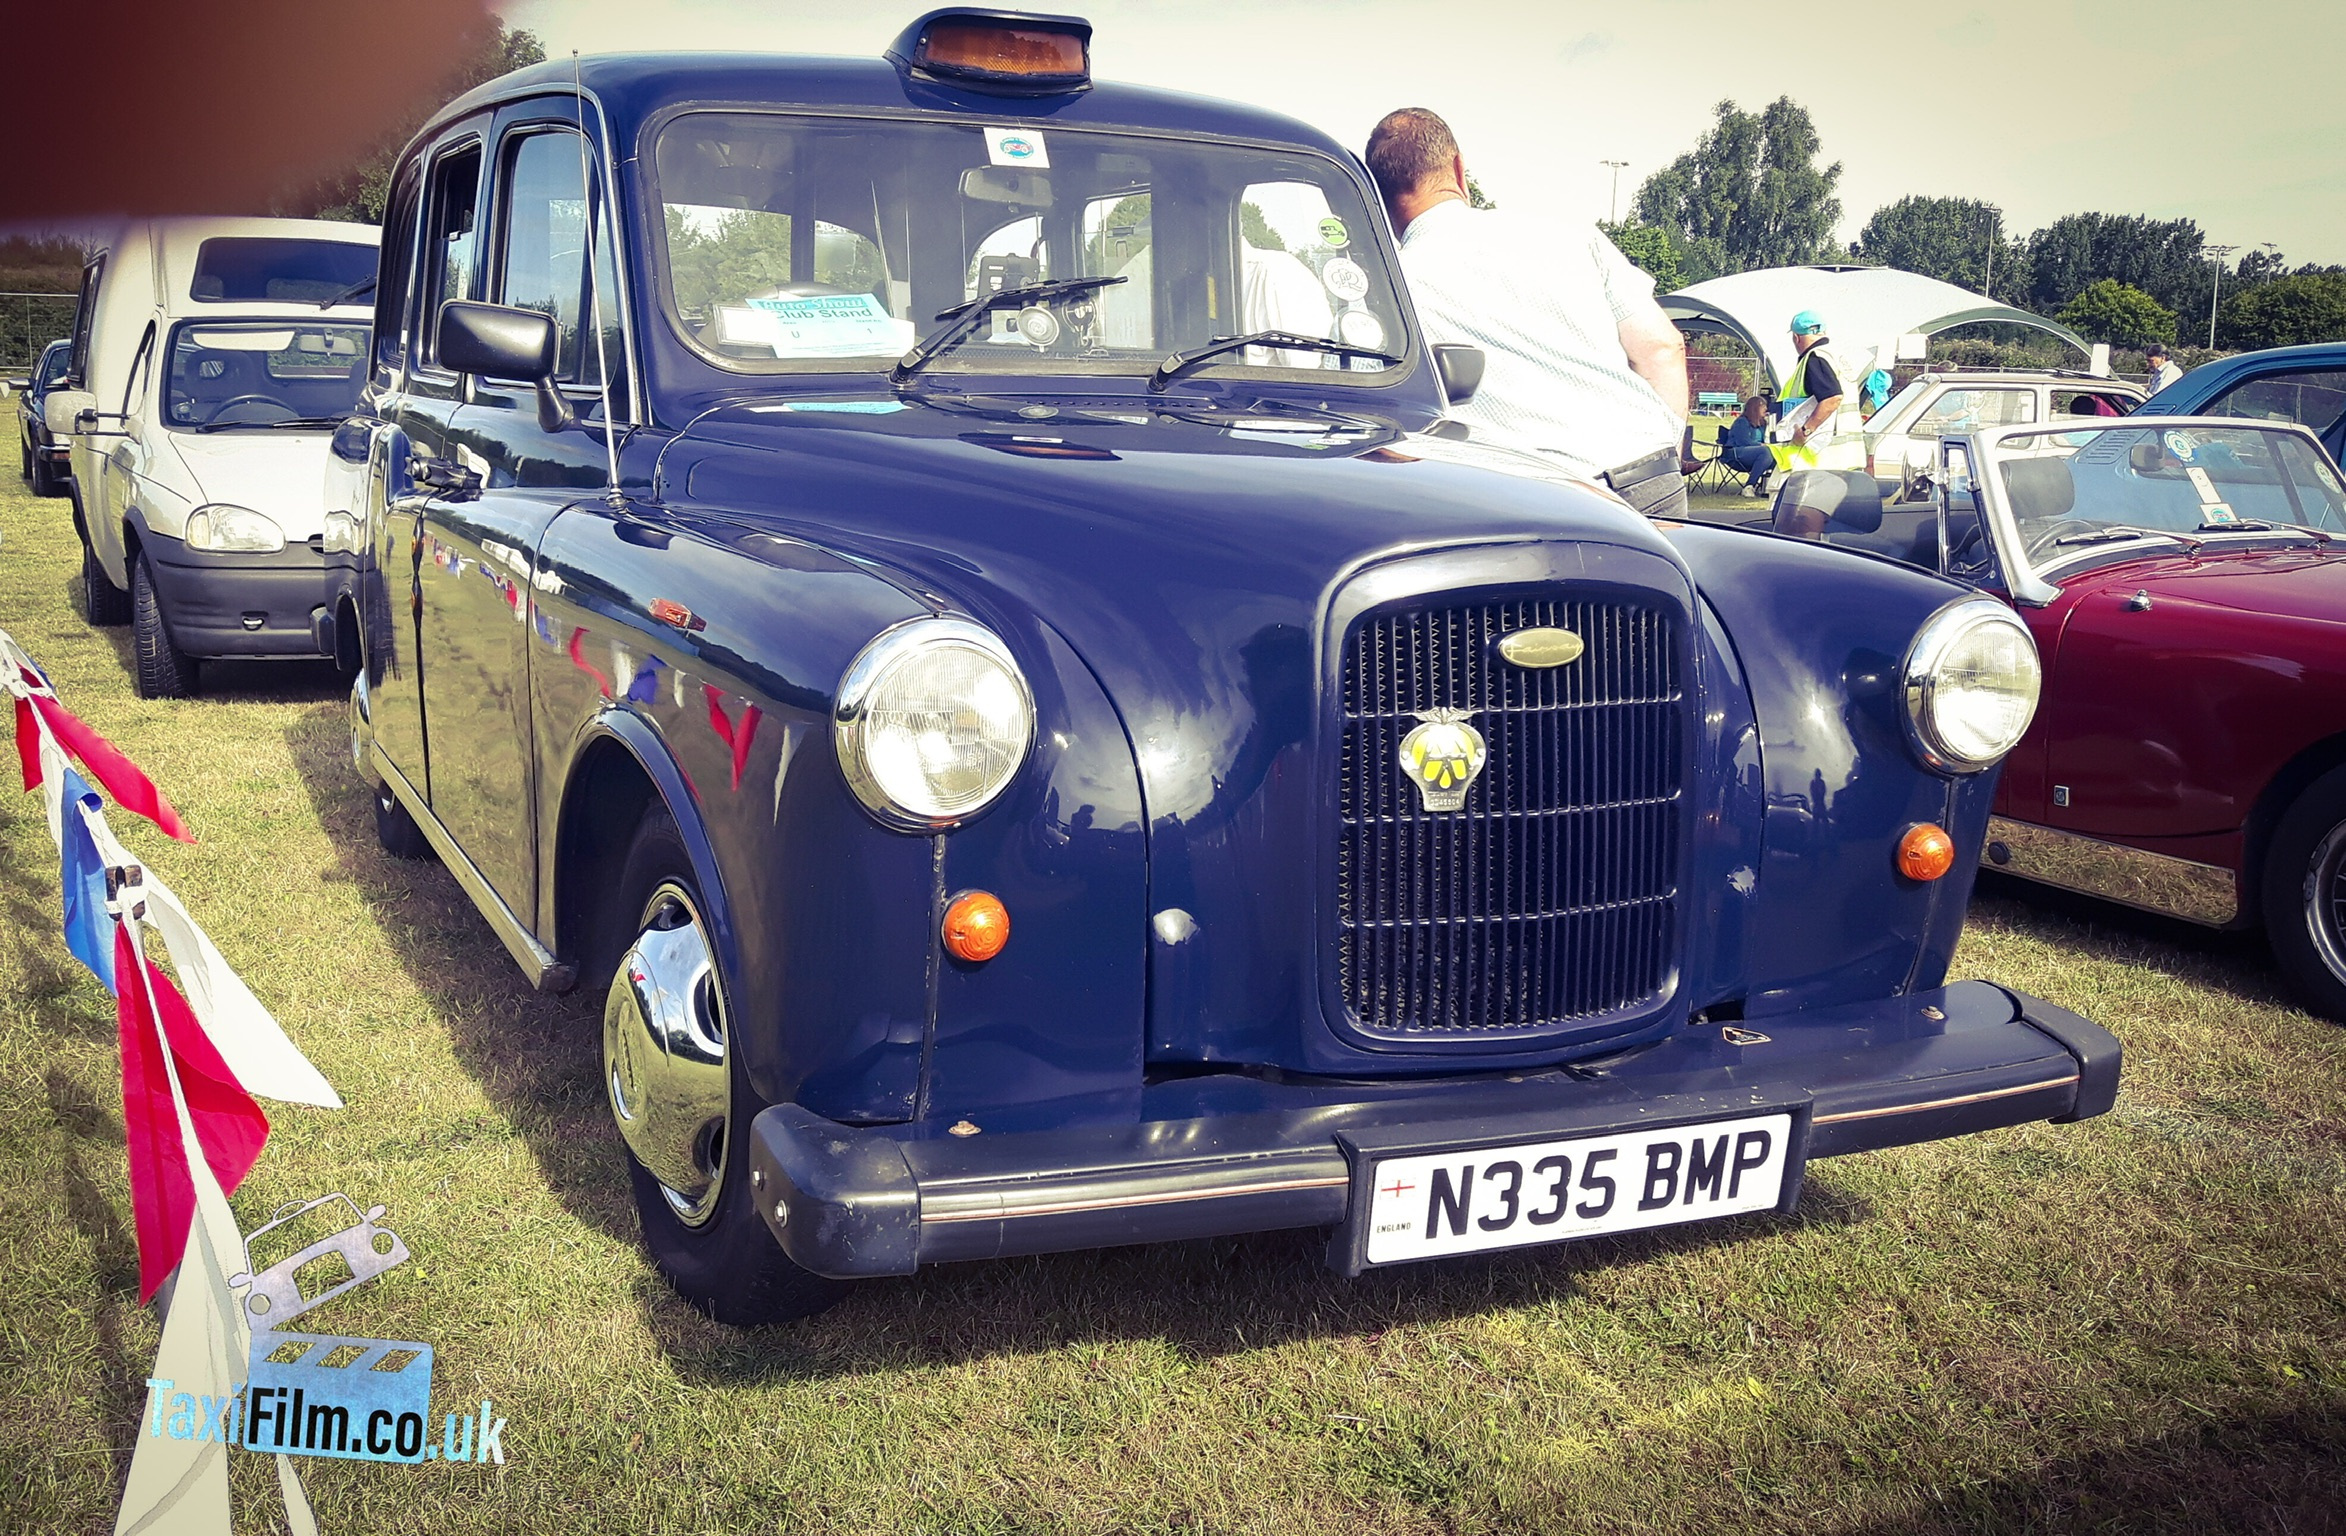 Royal Blue Fairway Taxi
1995, Middlesex
ref F0106